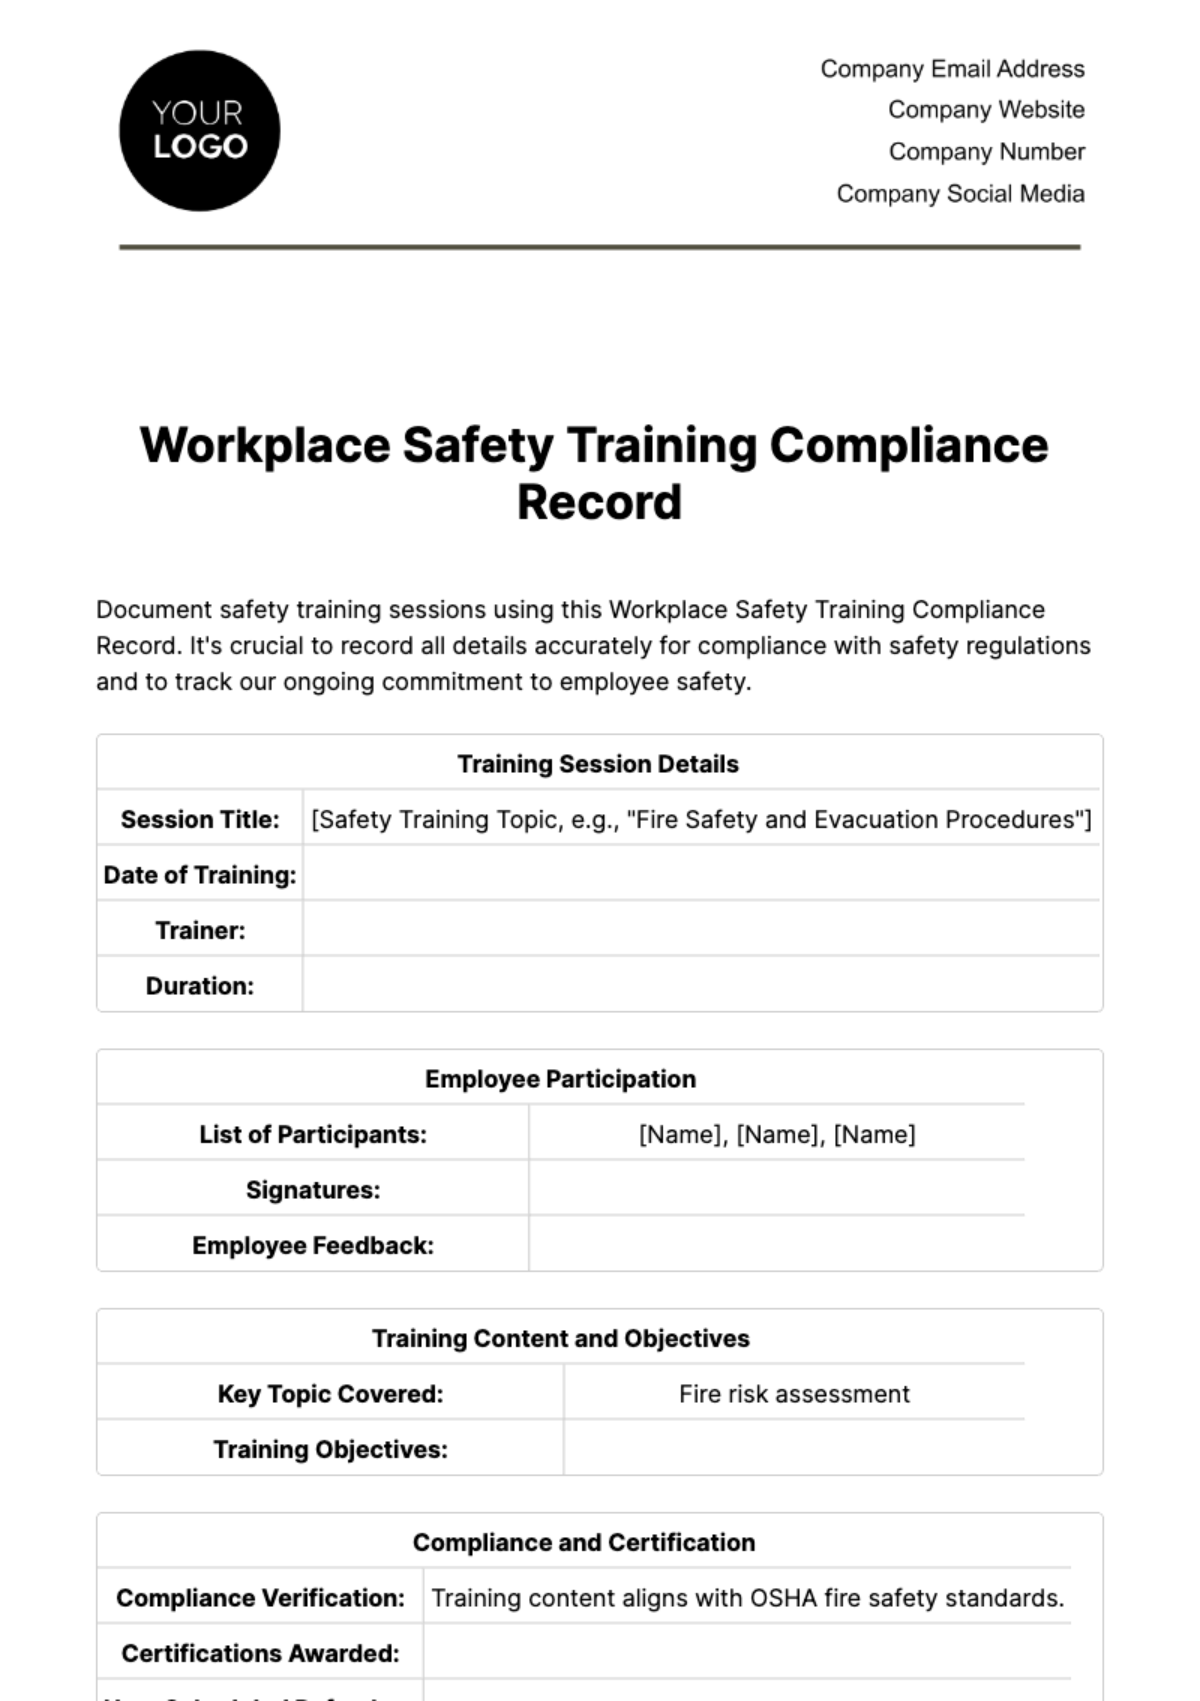 Free Workplace Safety Training Compliance Record Template